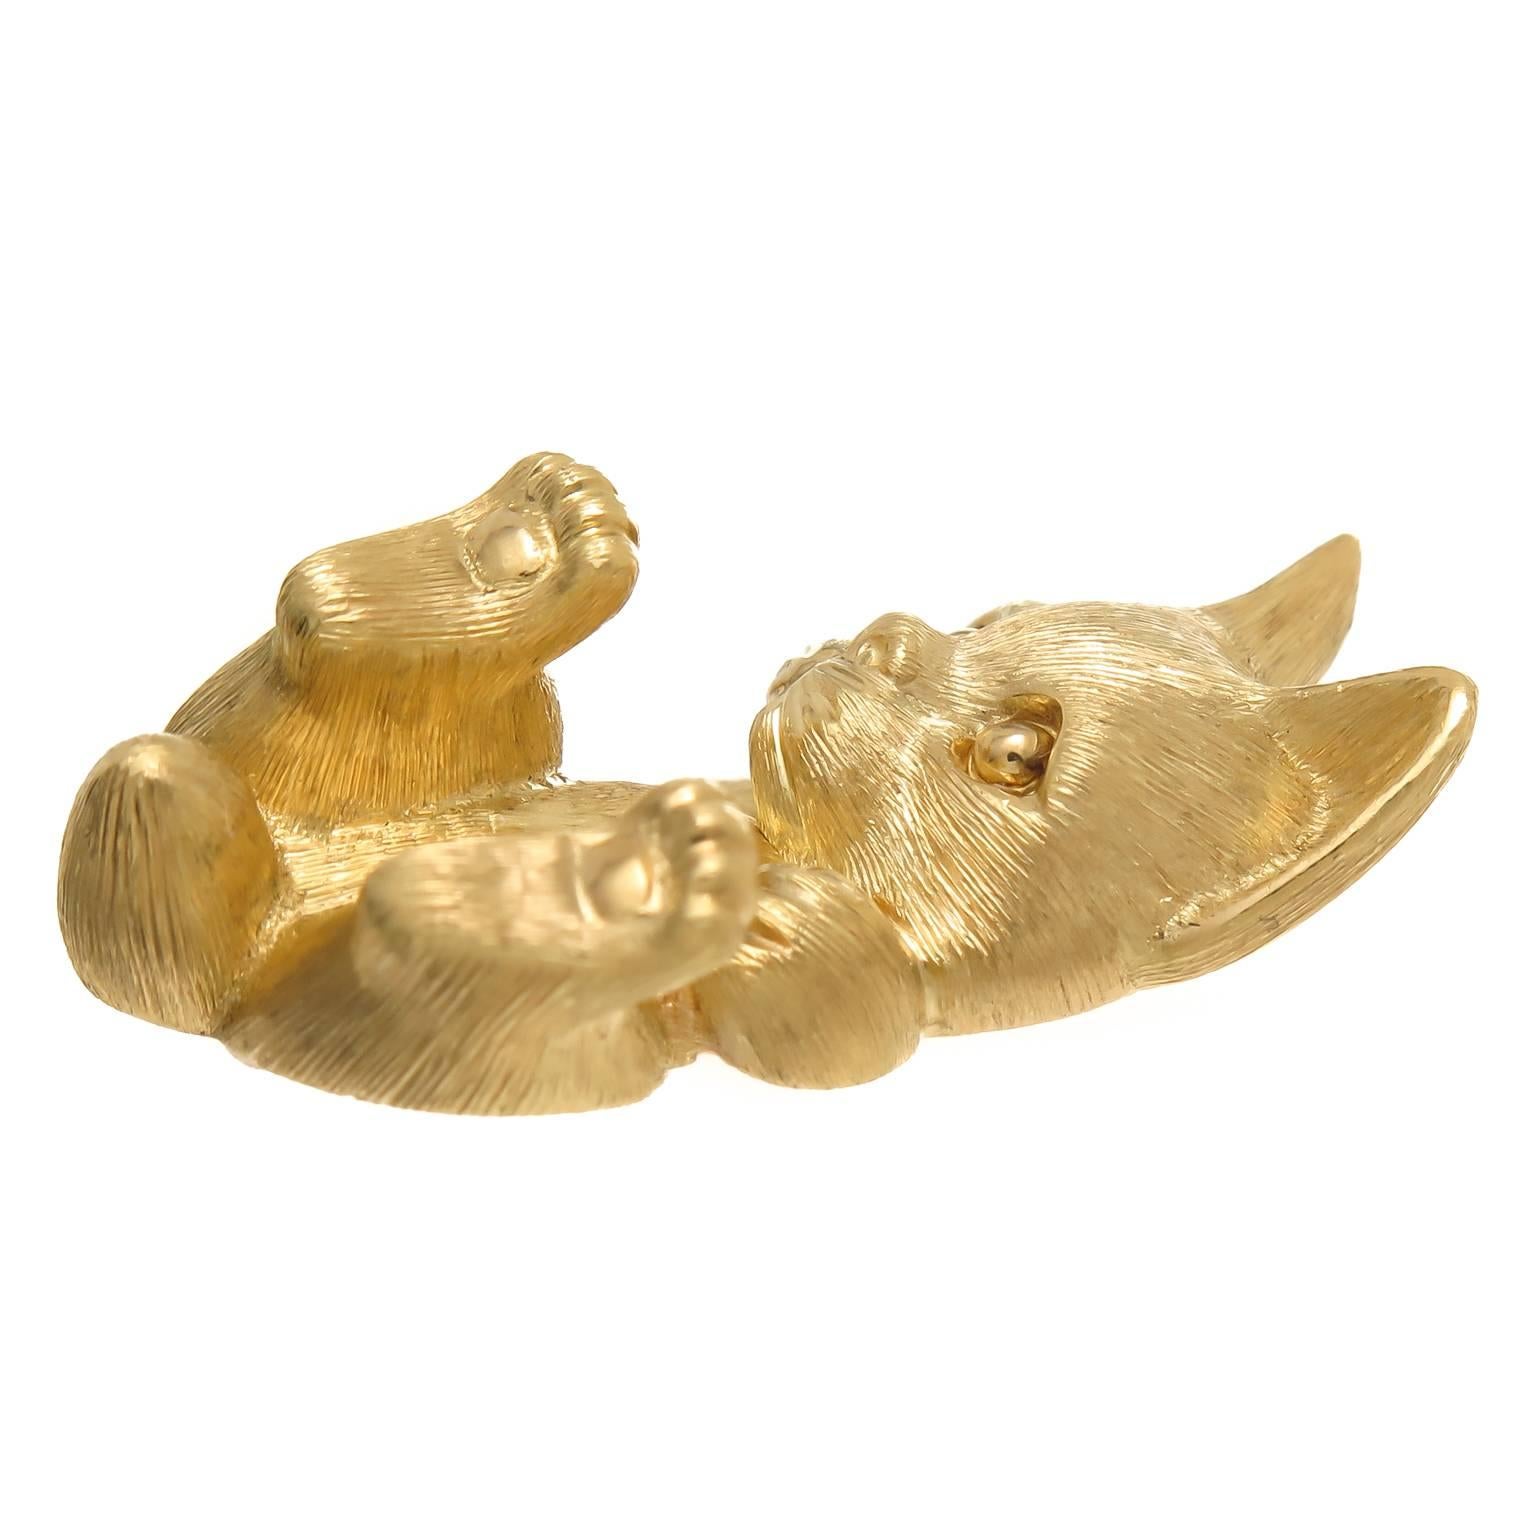 Circa 2000 18K yellow Gold Pussy Cat Brooch by Henry Dunay, measuring 1 3/8  X  3/4 inch, having nice weight being very nicely detailed and having a brushed finish. Signed and Numbered.